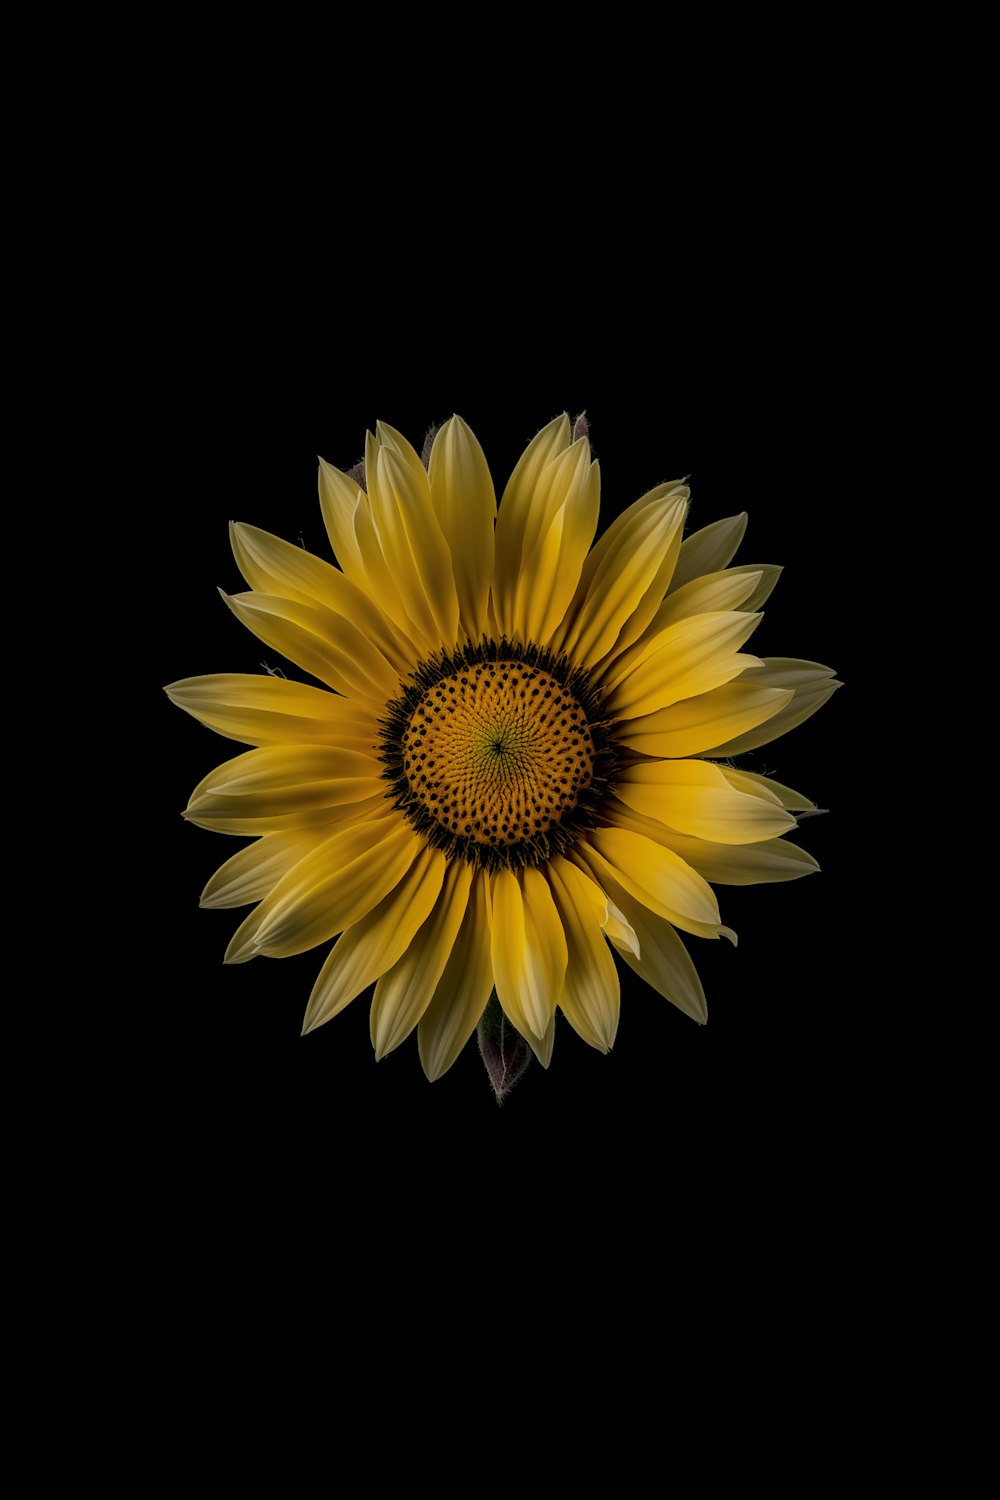 a large yellow sunflower on a black background